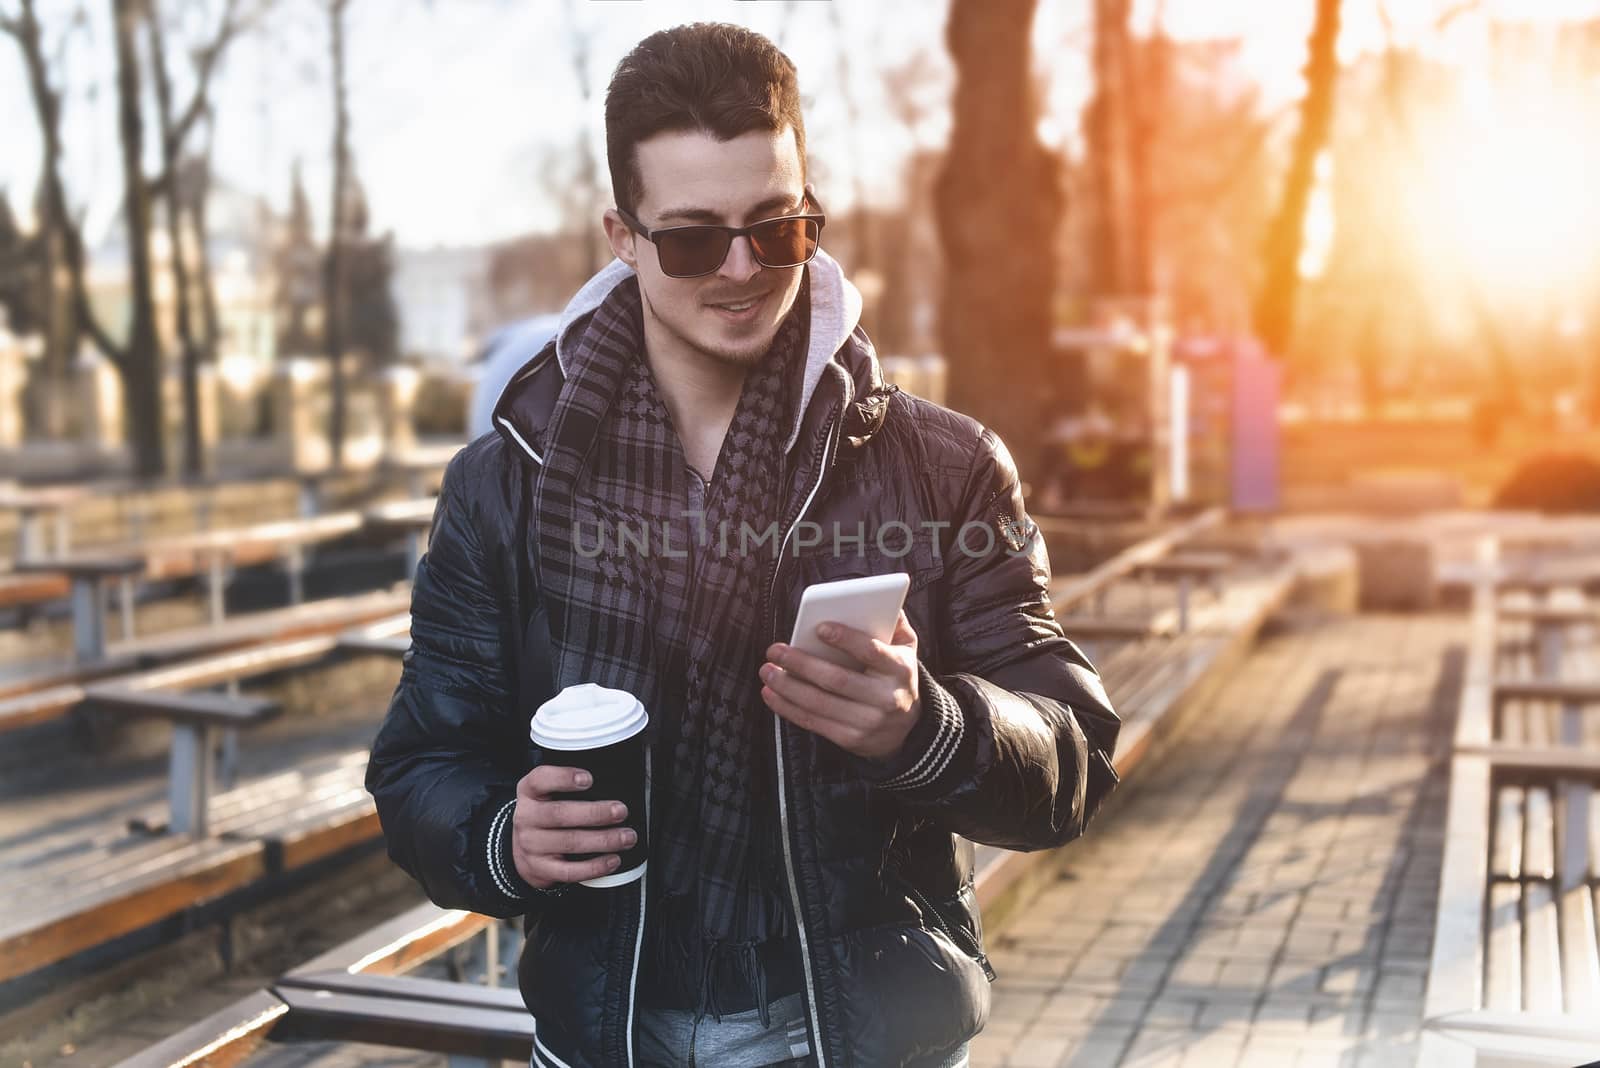 Caucasian man looking at mobile phone on street. by Nickstock